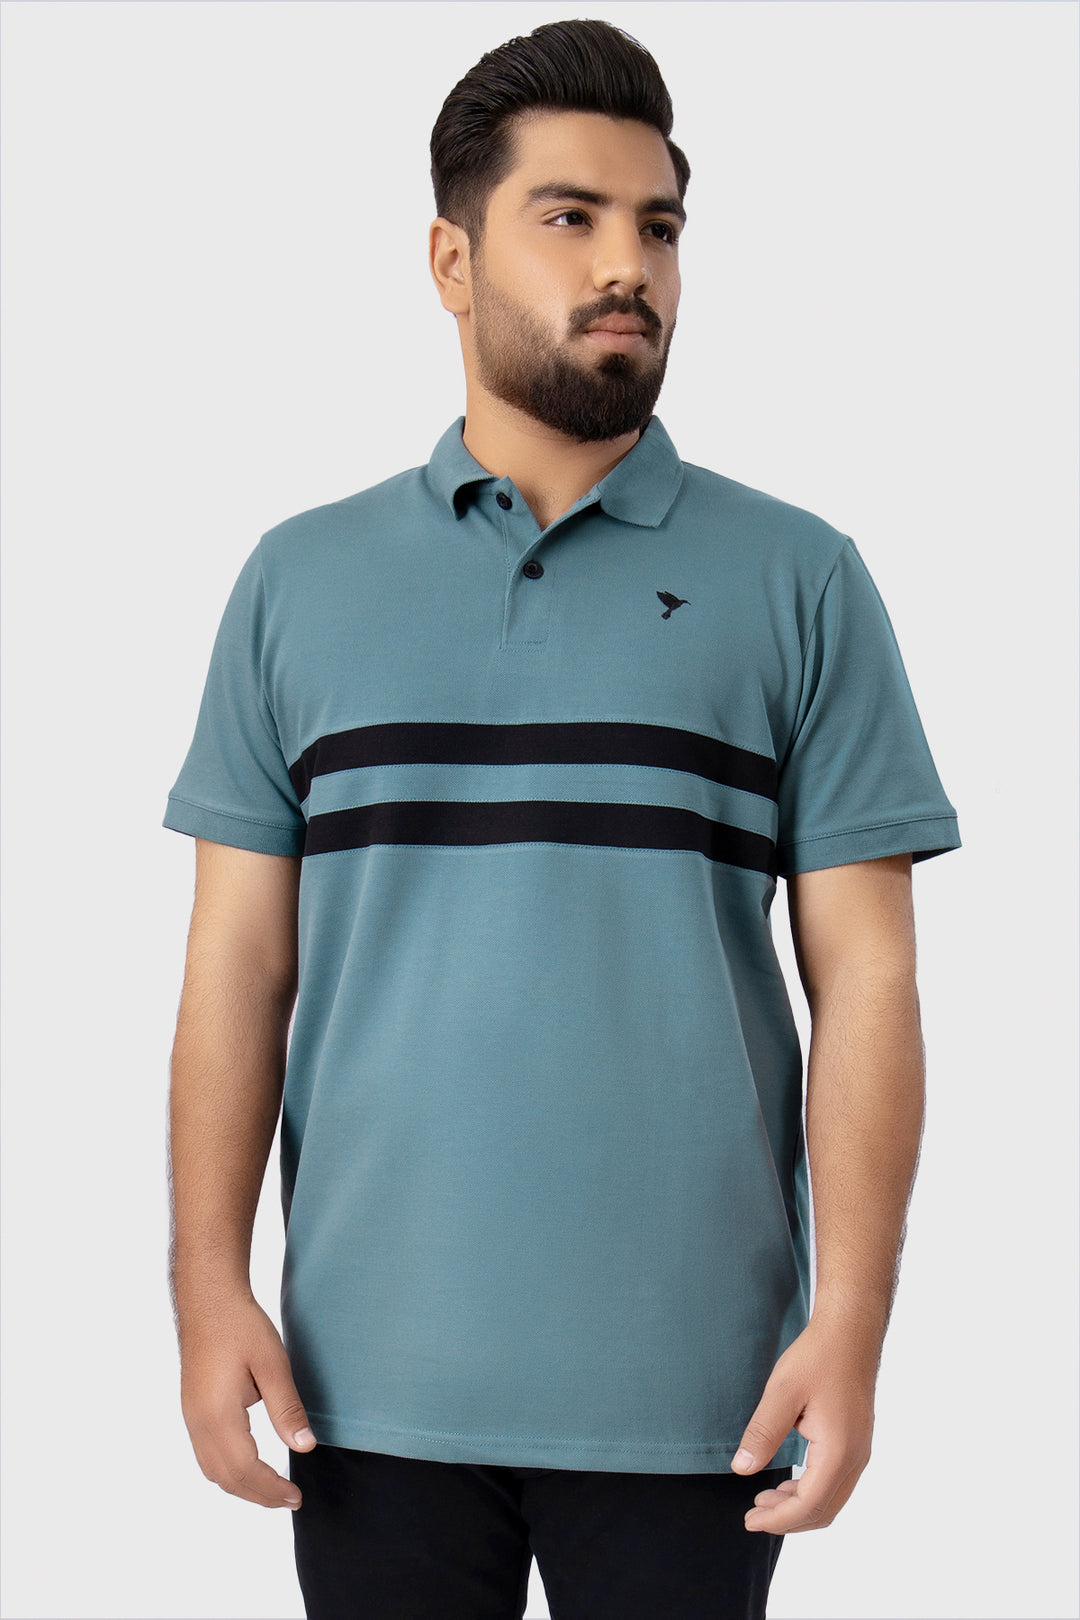 Stormy Blue Contrast Panelled Embroidered Polo Shirt (Plus Size) - A23 - MP0208P